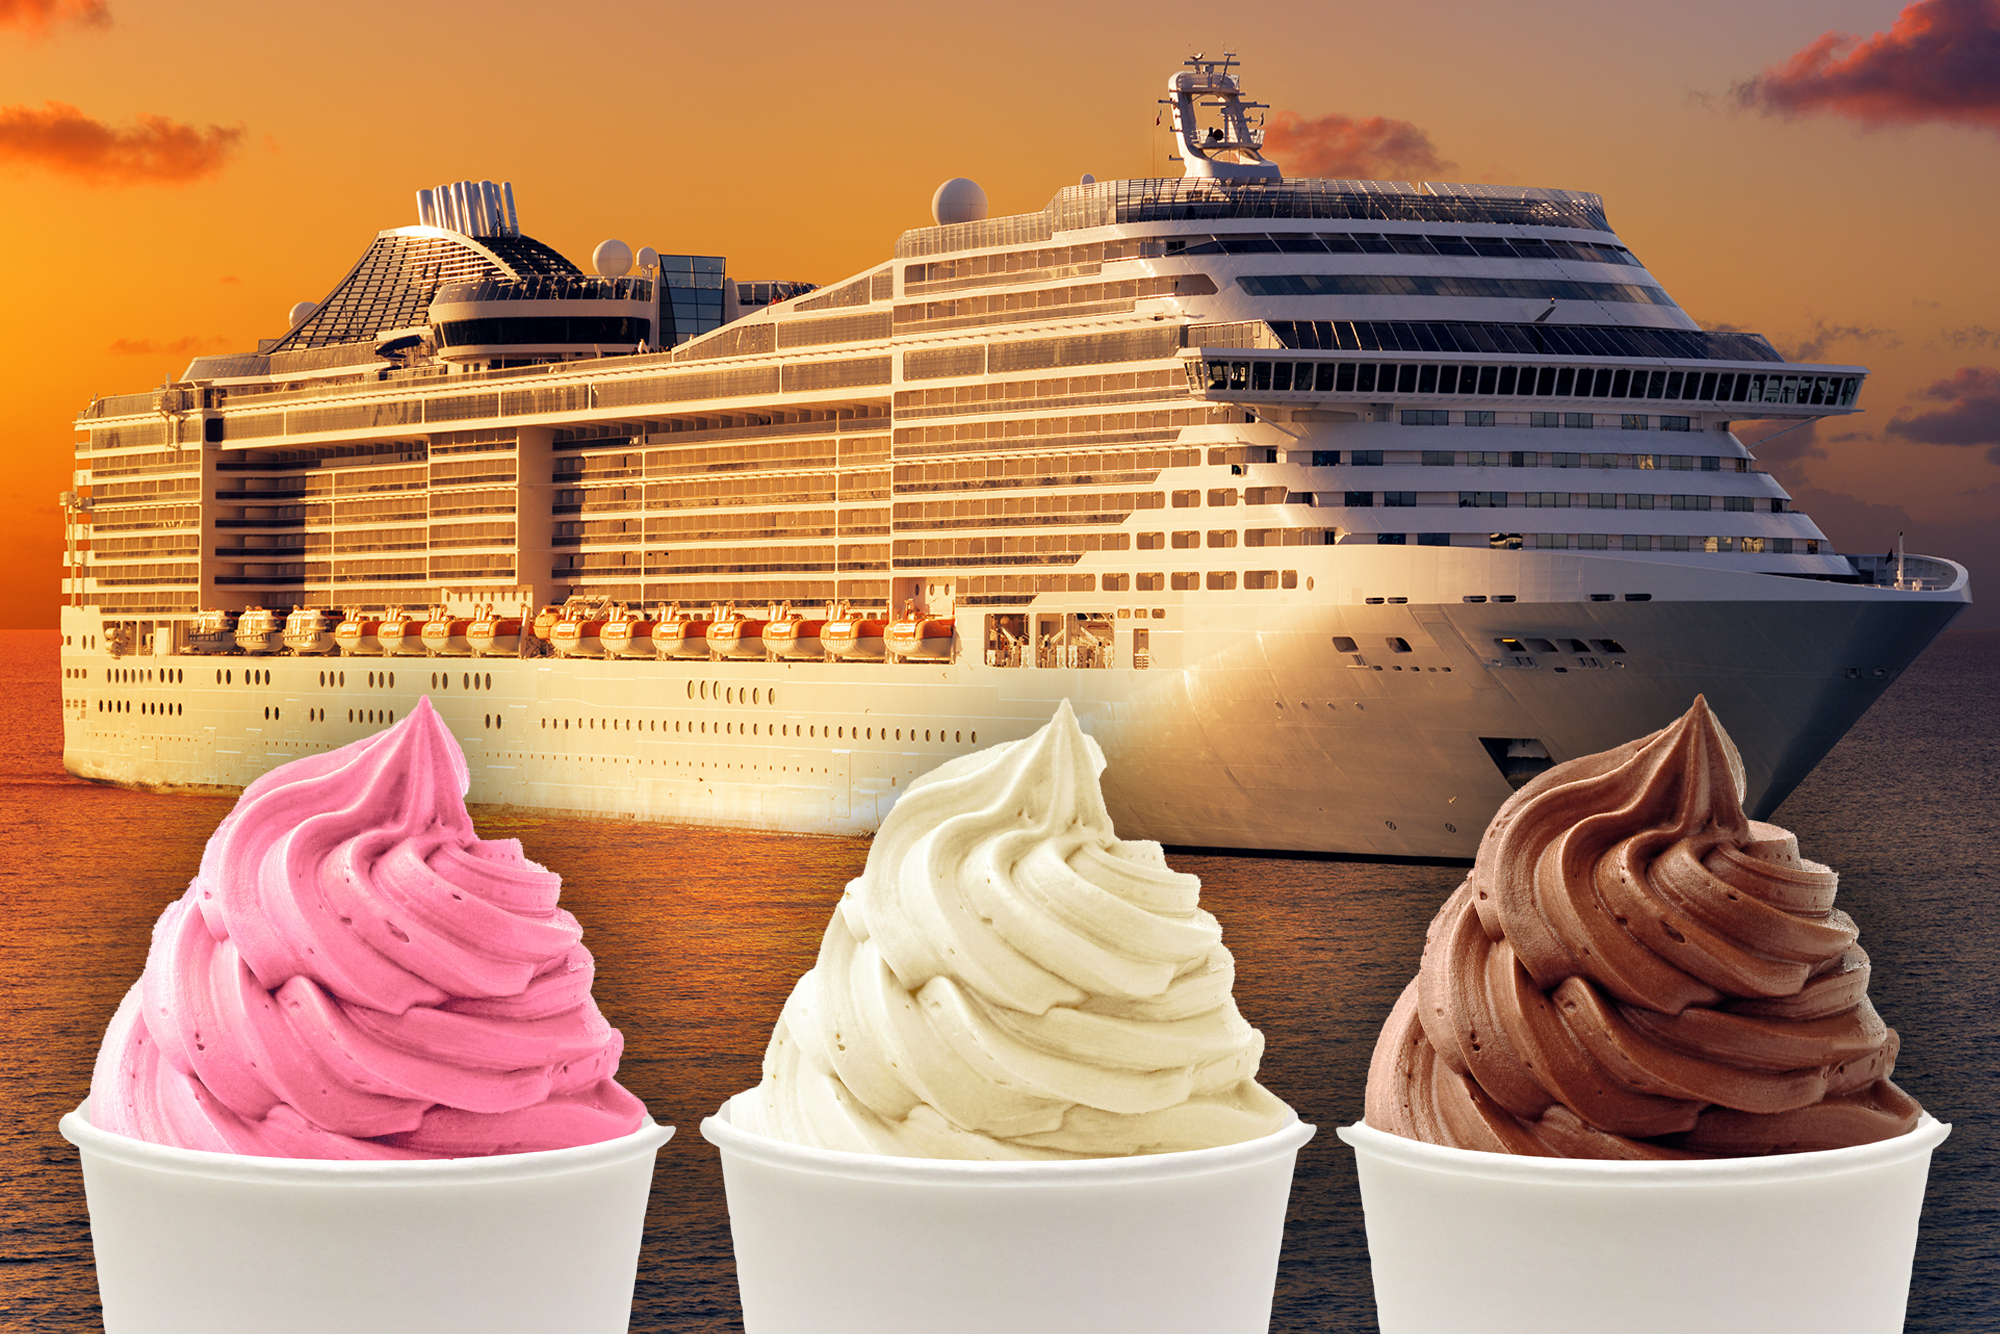 I’m an ex-cruise ship worker — here’s the shocking reason we throw free ice cream parties